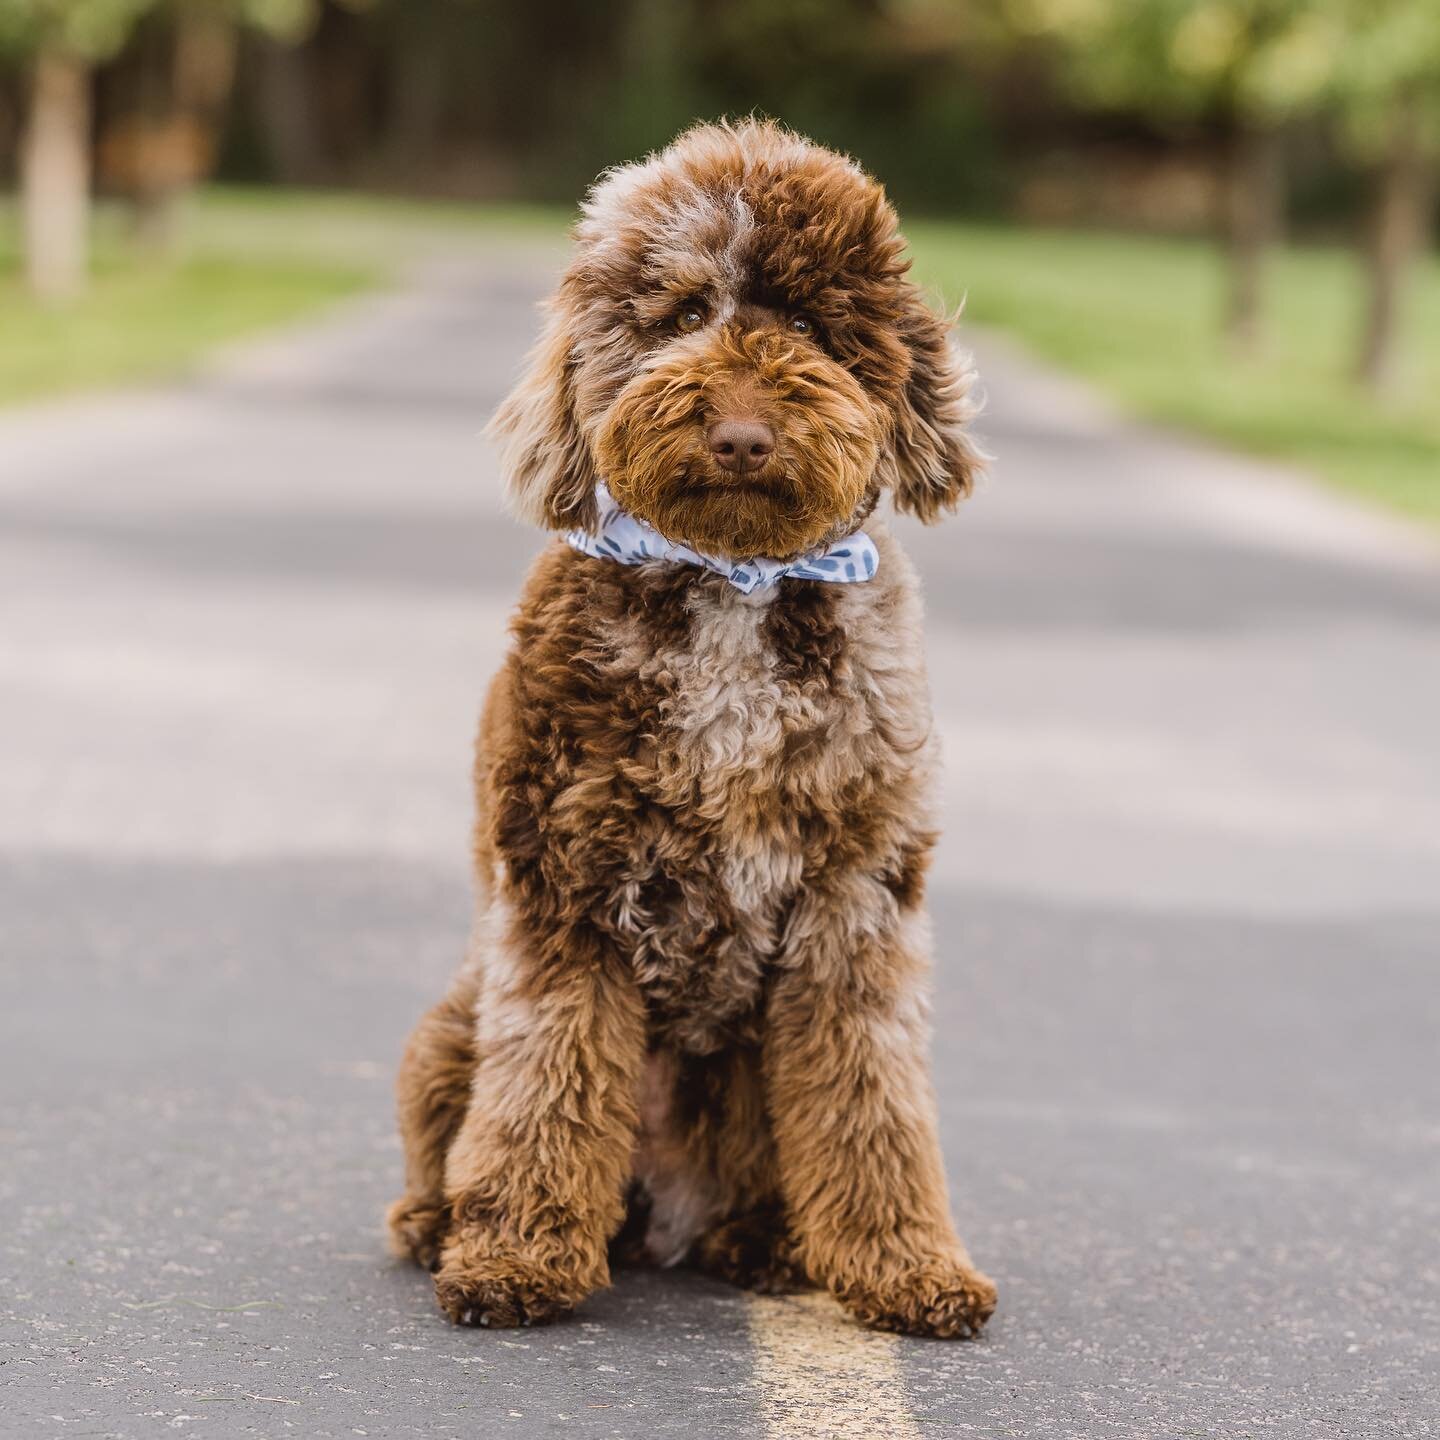 Benny 🤎 We are beyond excited for the future with one of our many amazing studs! Benny is 7 months old and will be ready soon. Follow him and his puppies @poodlestuds 😗 He is weighing in at 20lbs and might grow a tiny bit more. Stunning 🤩 #minipoo